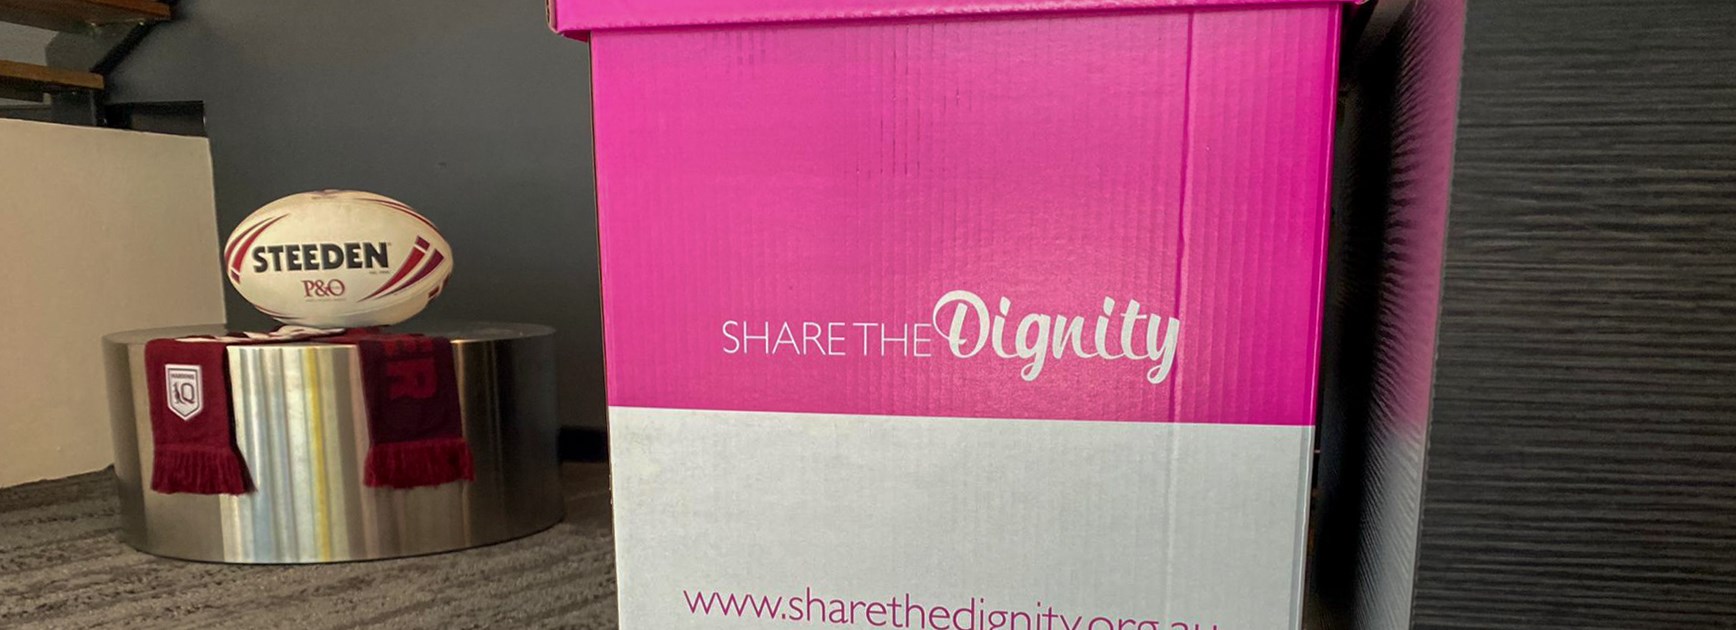 Share the Dignity: Helping young females feel safe and supported